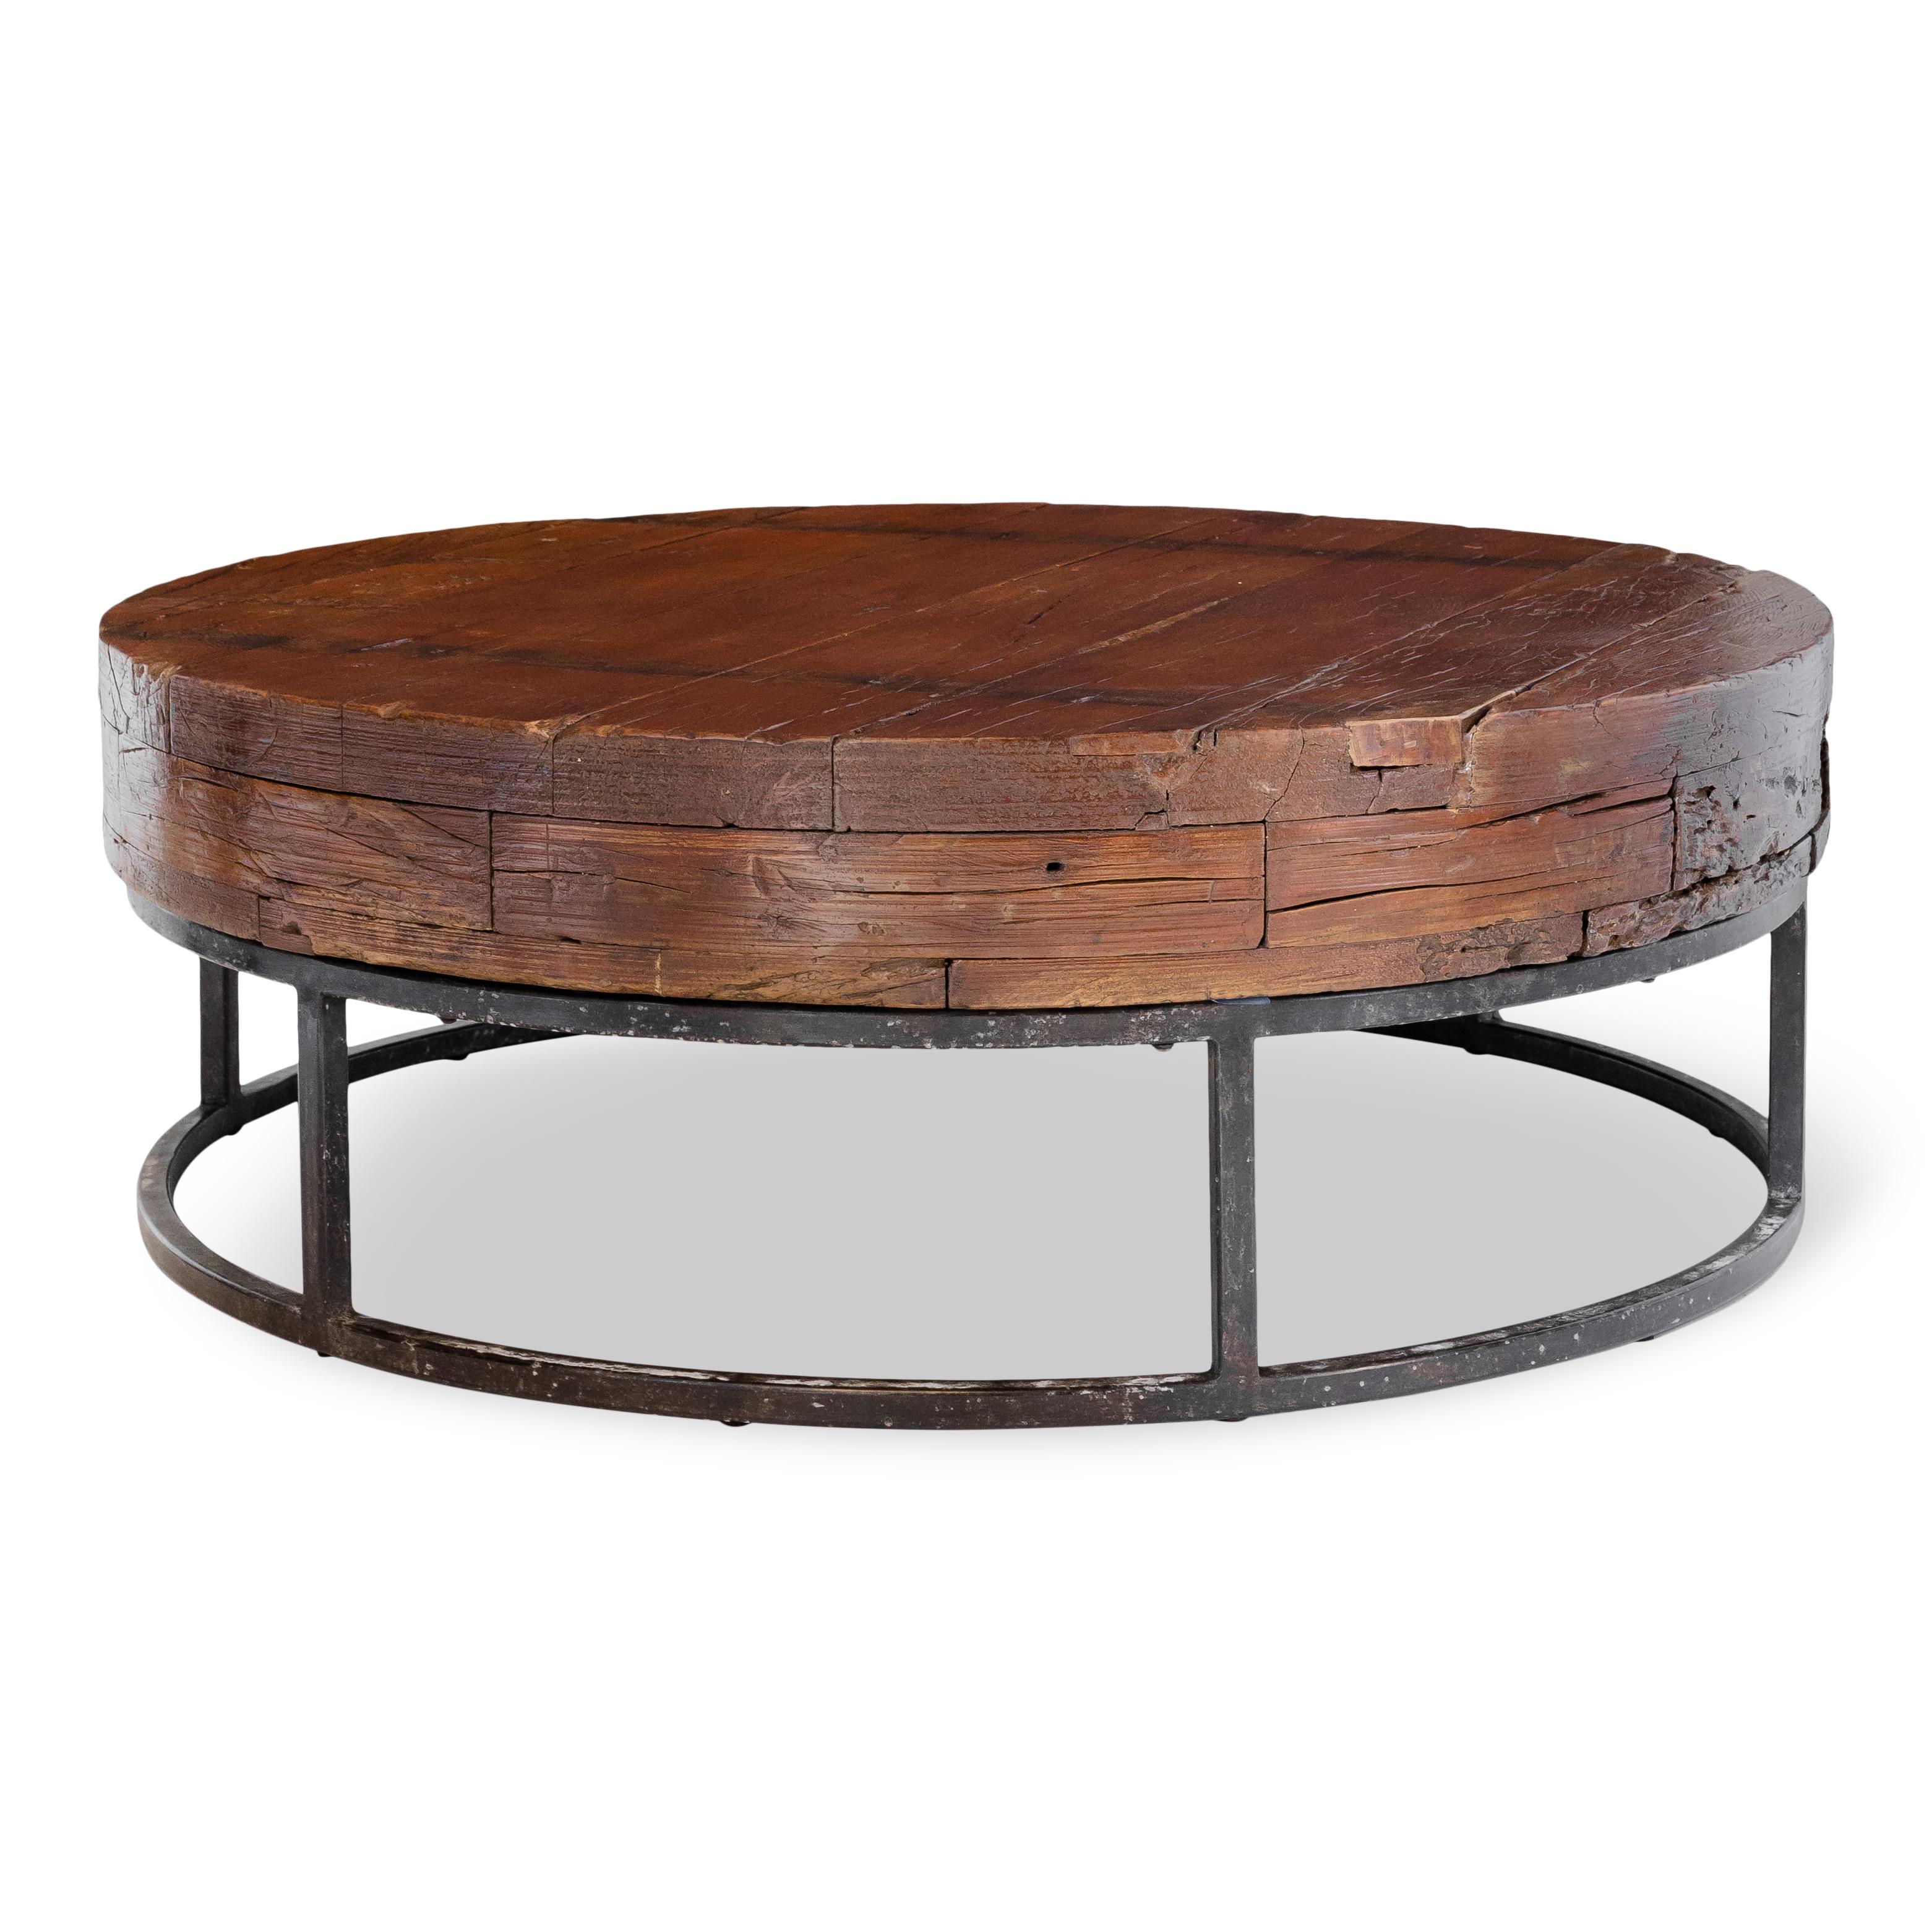 British Colonial Industrial Mold as Coffee Table In Good Condition For Sale In Dallas, TX